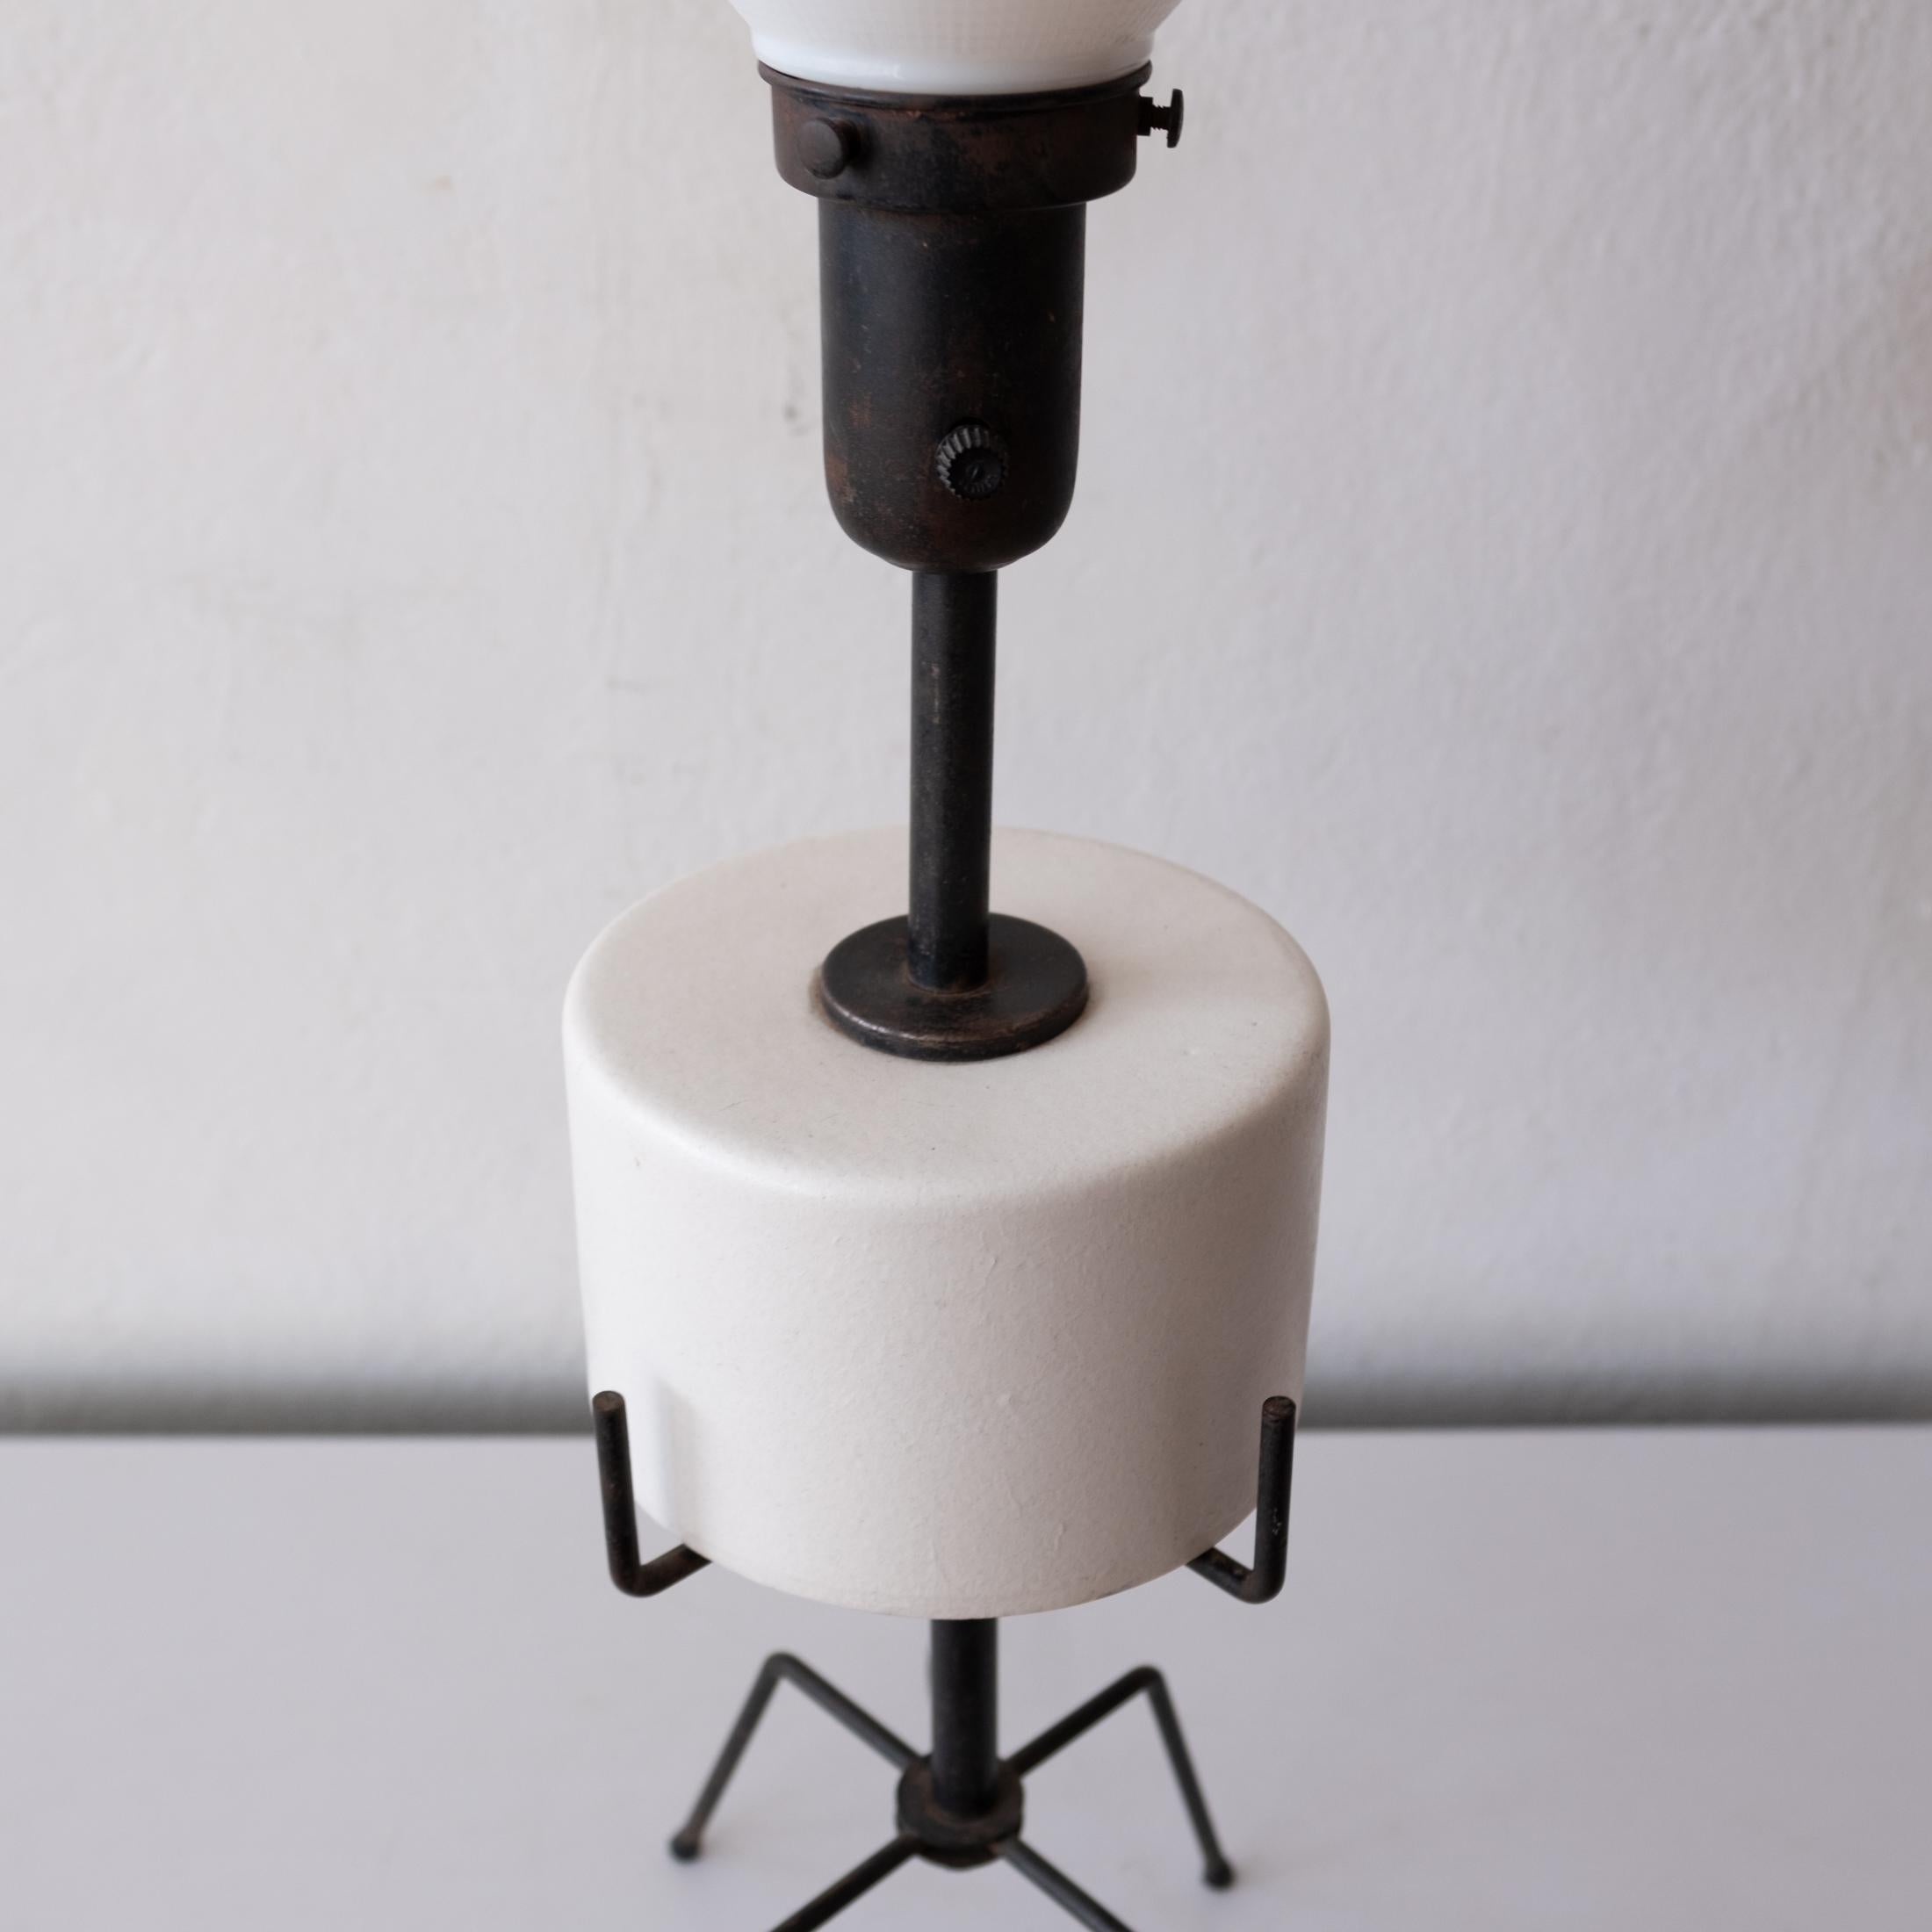 Metal Ceramic and Iron Ben Seibel Table Lamp 1950s For Sale